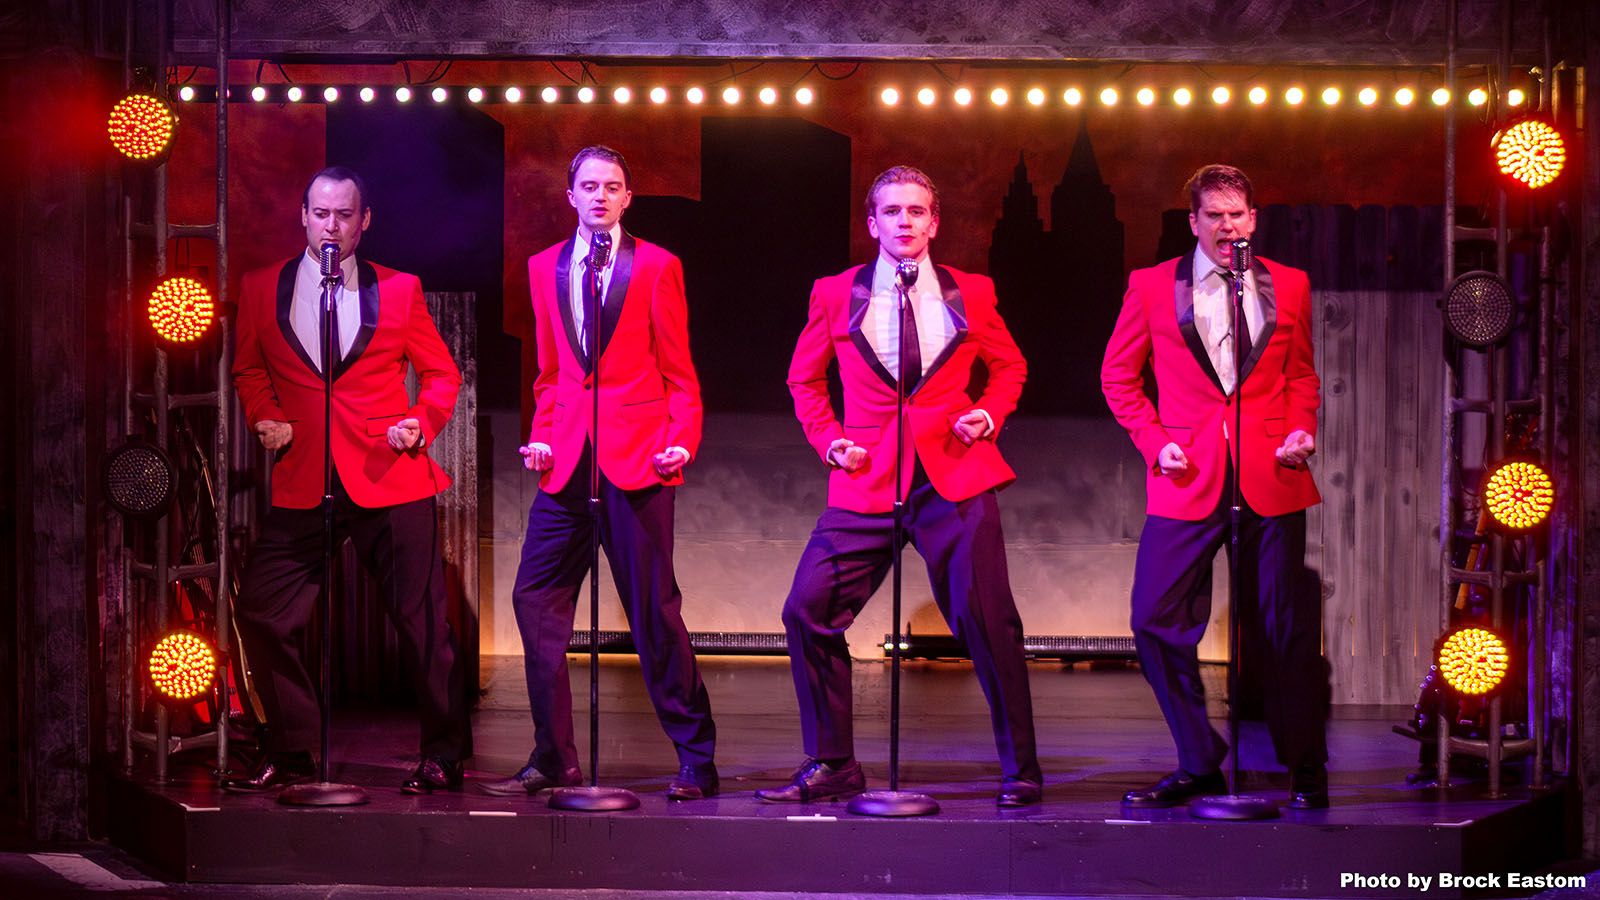 The music of Frankie Valli & The Four Seasons is brought to life in the Fort Wayne Civic Theatre’s production of Jersey Boys. Running through May 19 at Arts United Center, the show stars, from left, Aaron Mann, Dylan Record, Owen Saalfrank, and Adam Cesarz.